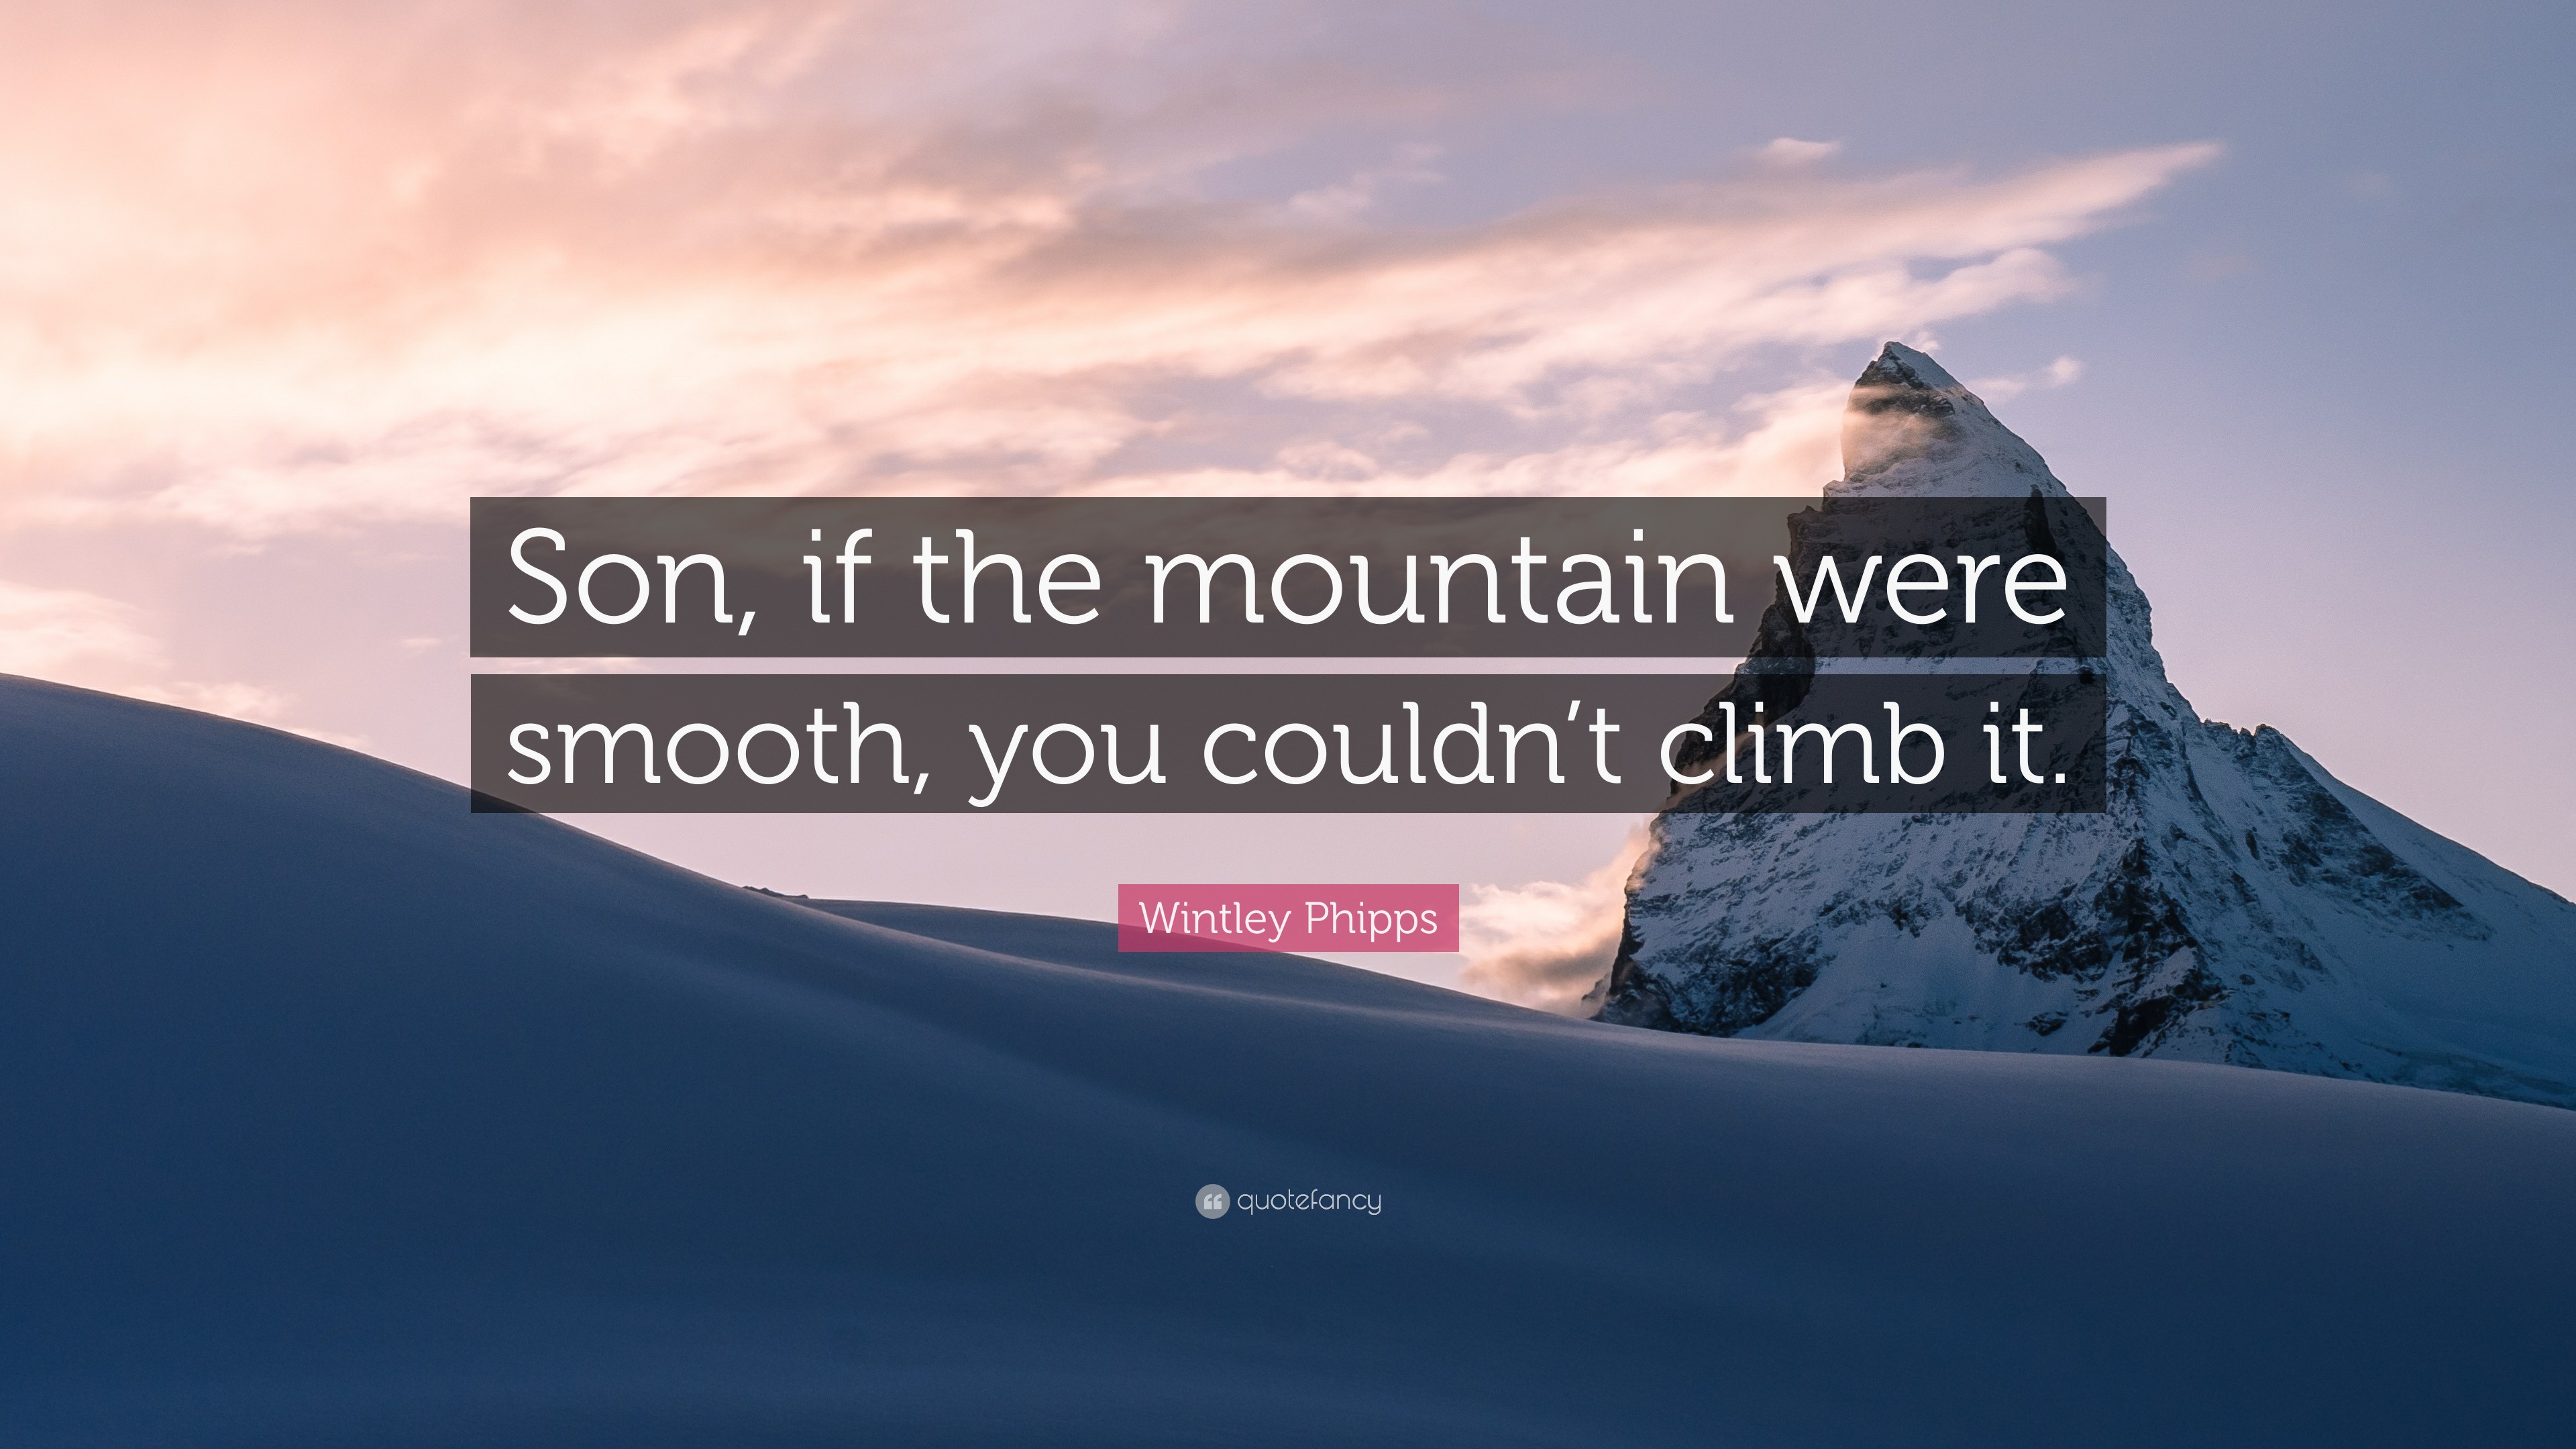 Wintley Phipps Quote: “Son, if the mountain were smooth, you couldn't climb  it.”